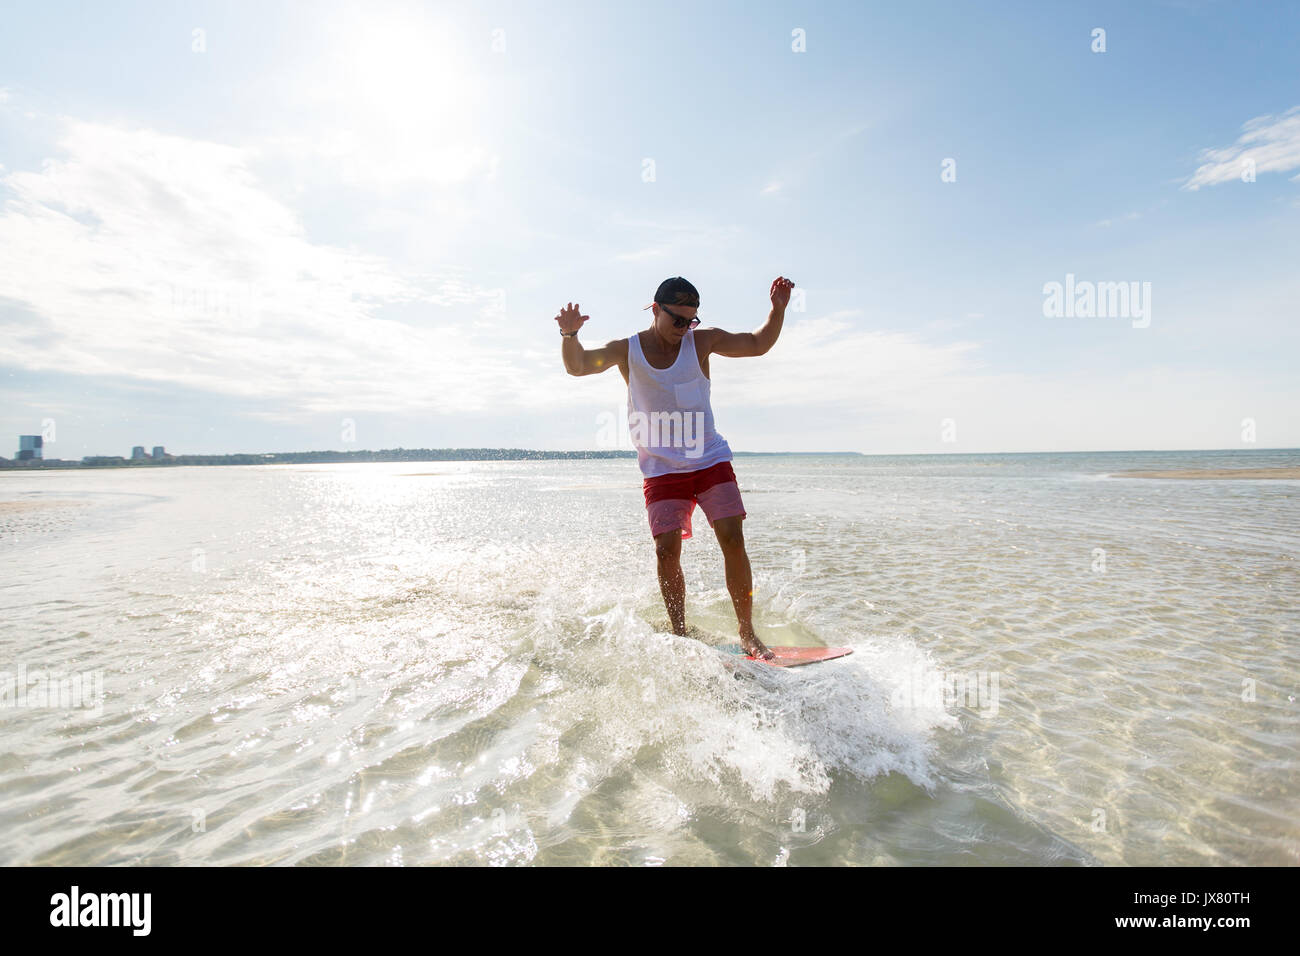 young man riding on skimboard on summer beach Stock Photo